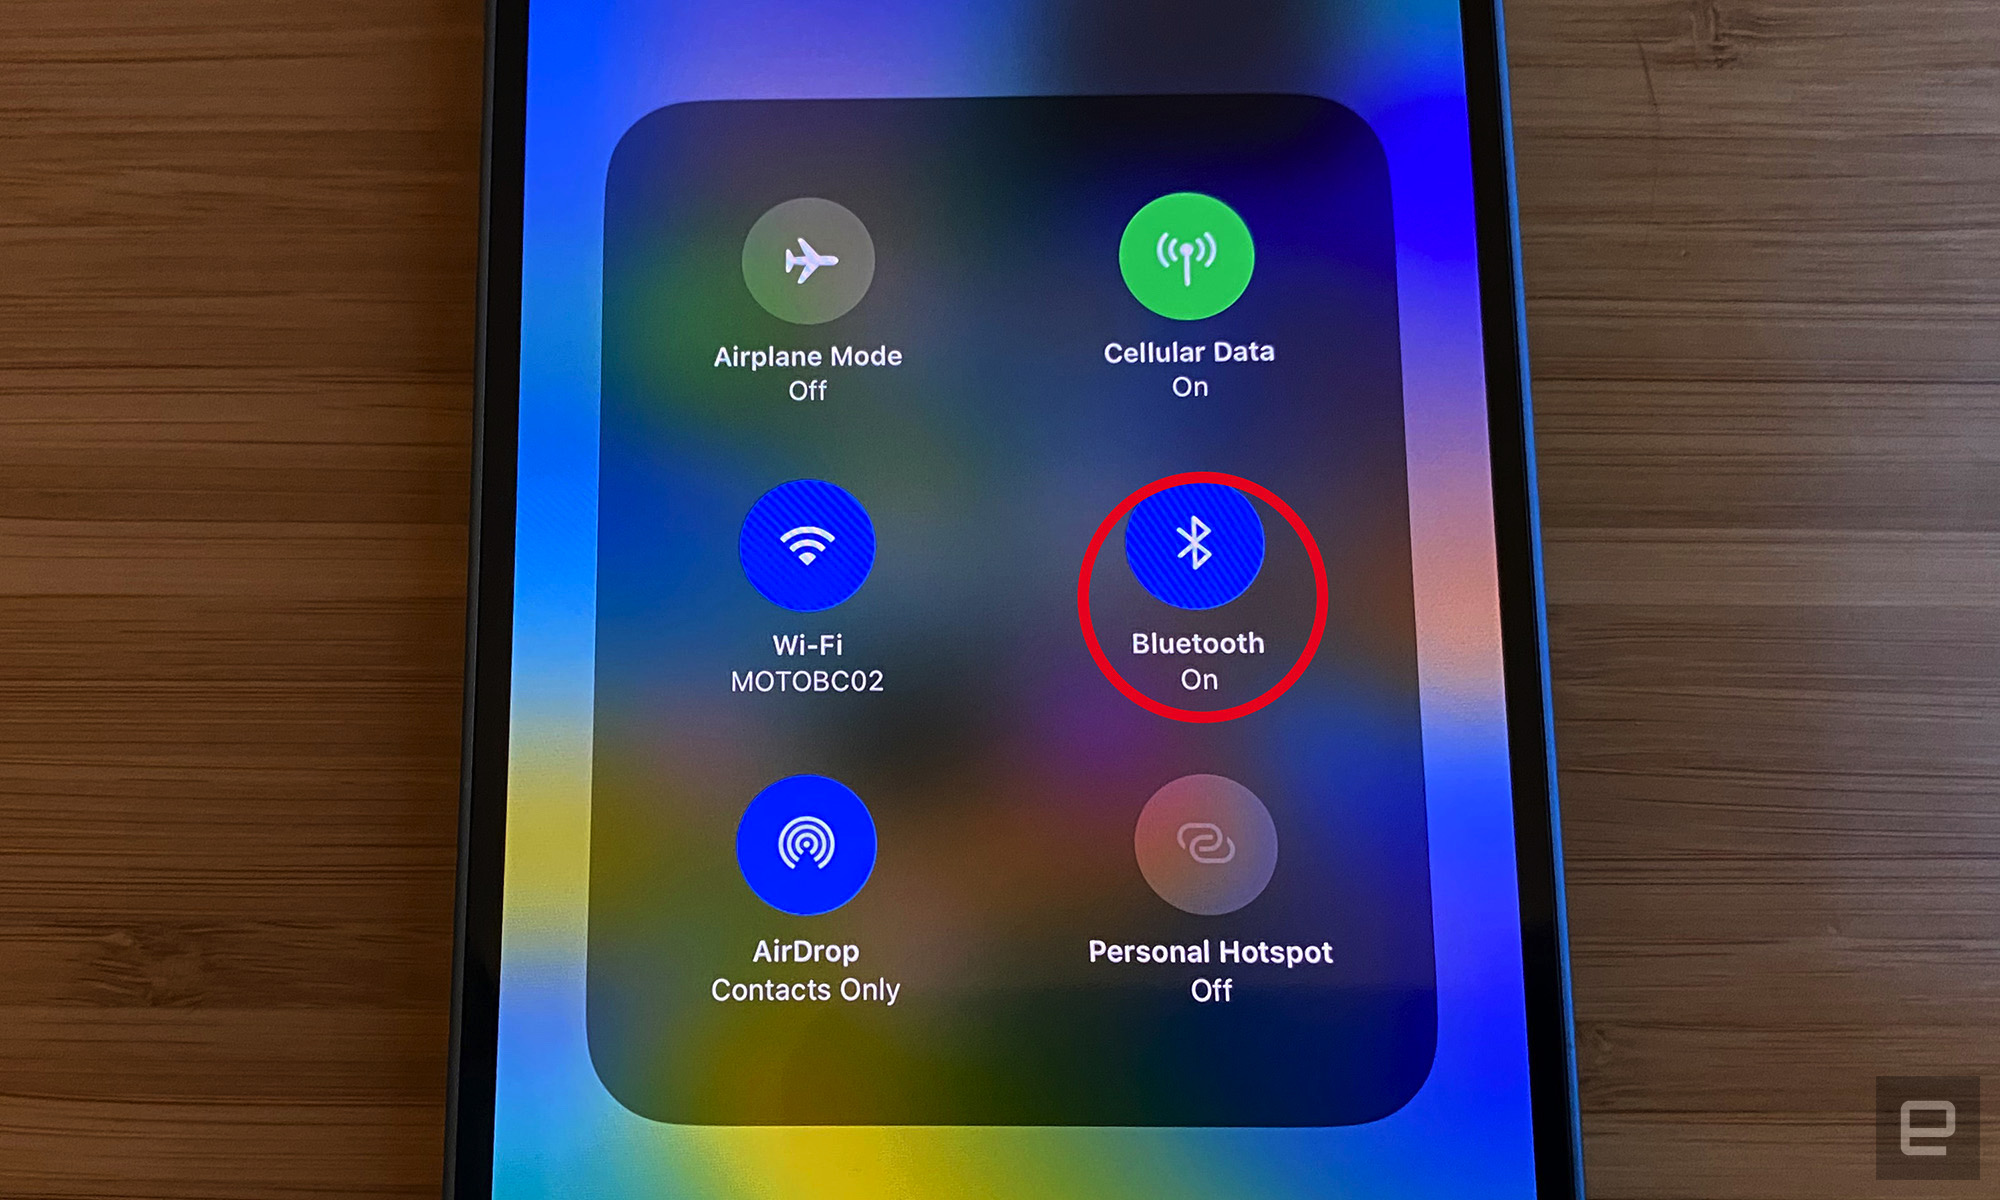 How to connect your AirPods to your iPhone, Mac, Apple Watch and more